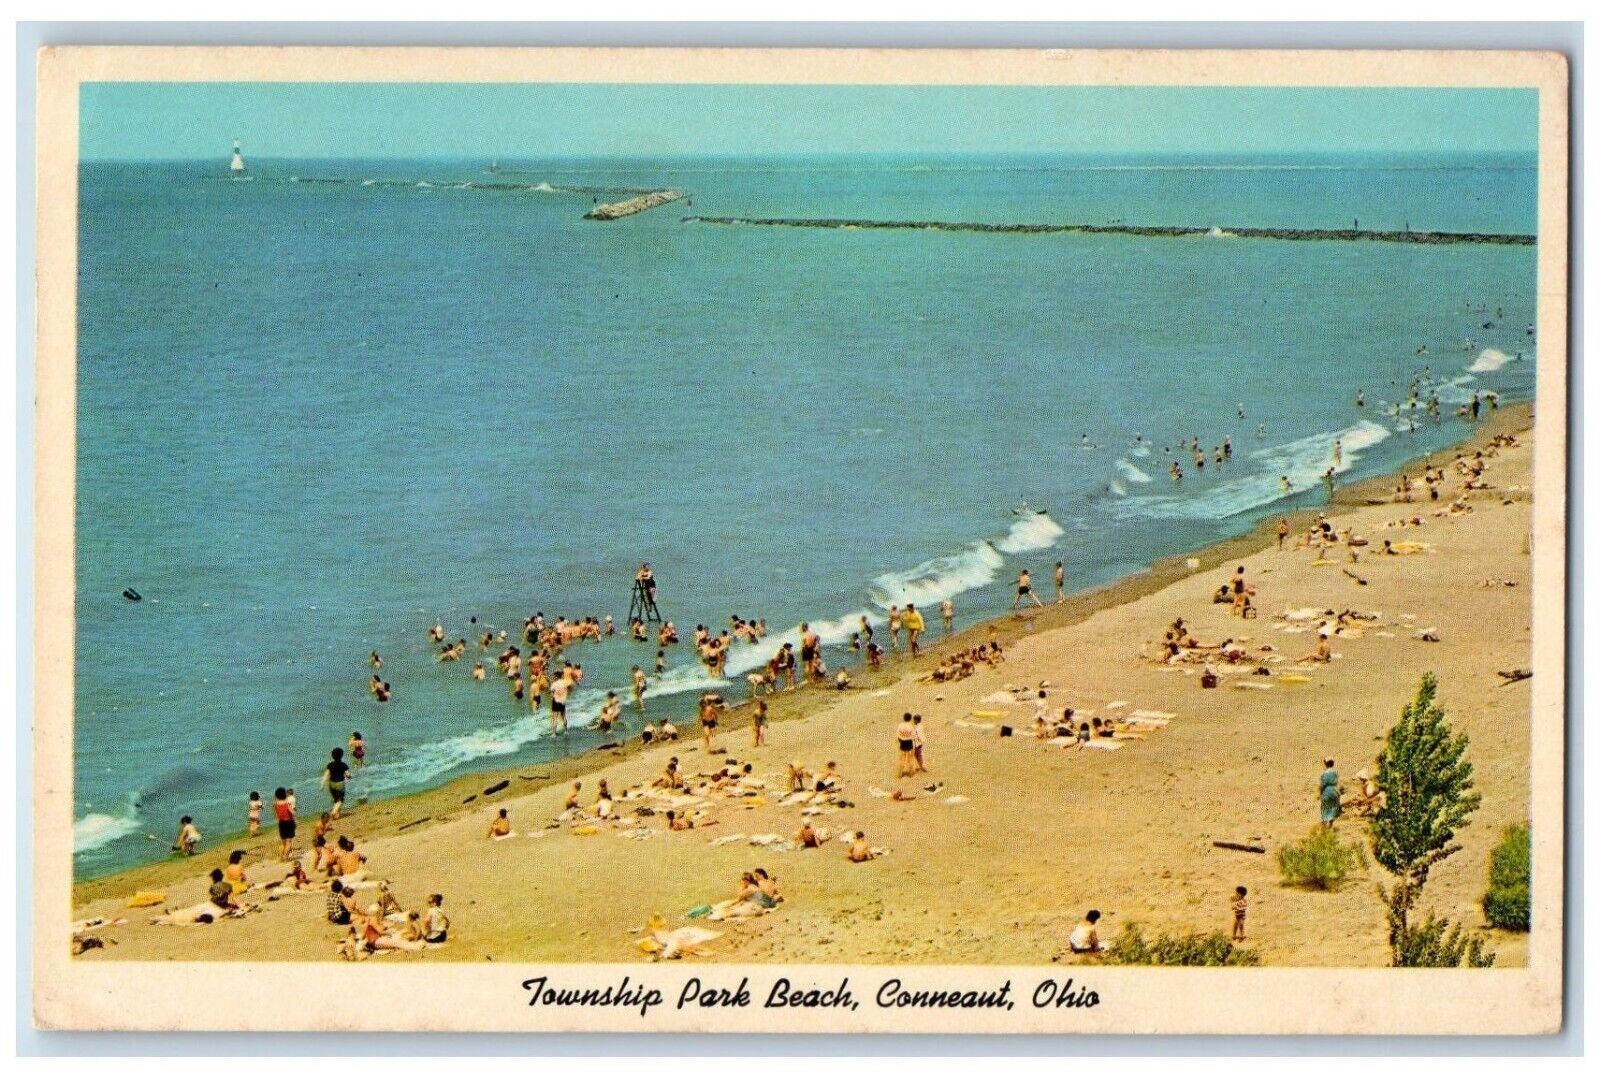 1967 View Of Township Park Beach Conneaut Ohio OH Posted Vintage Postcard